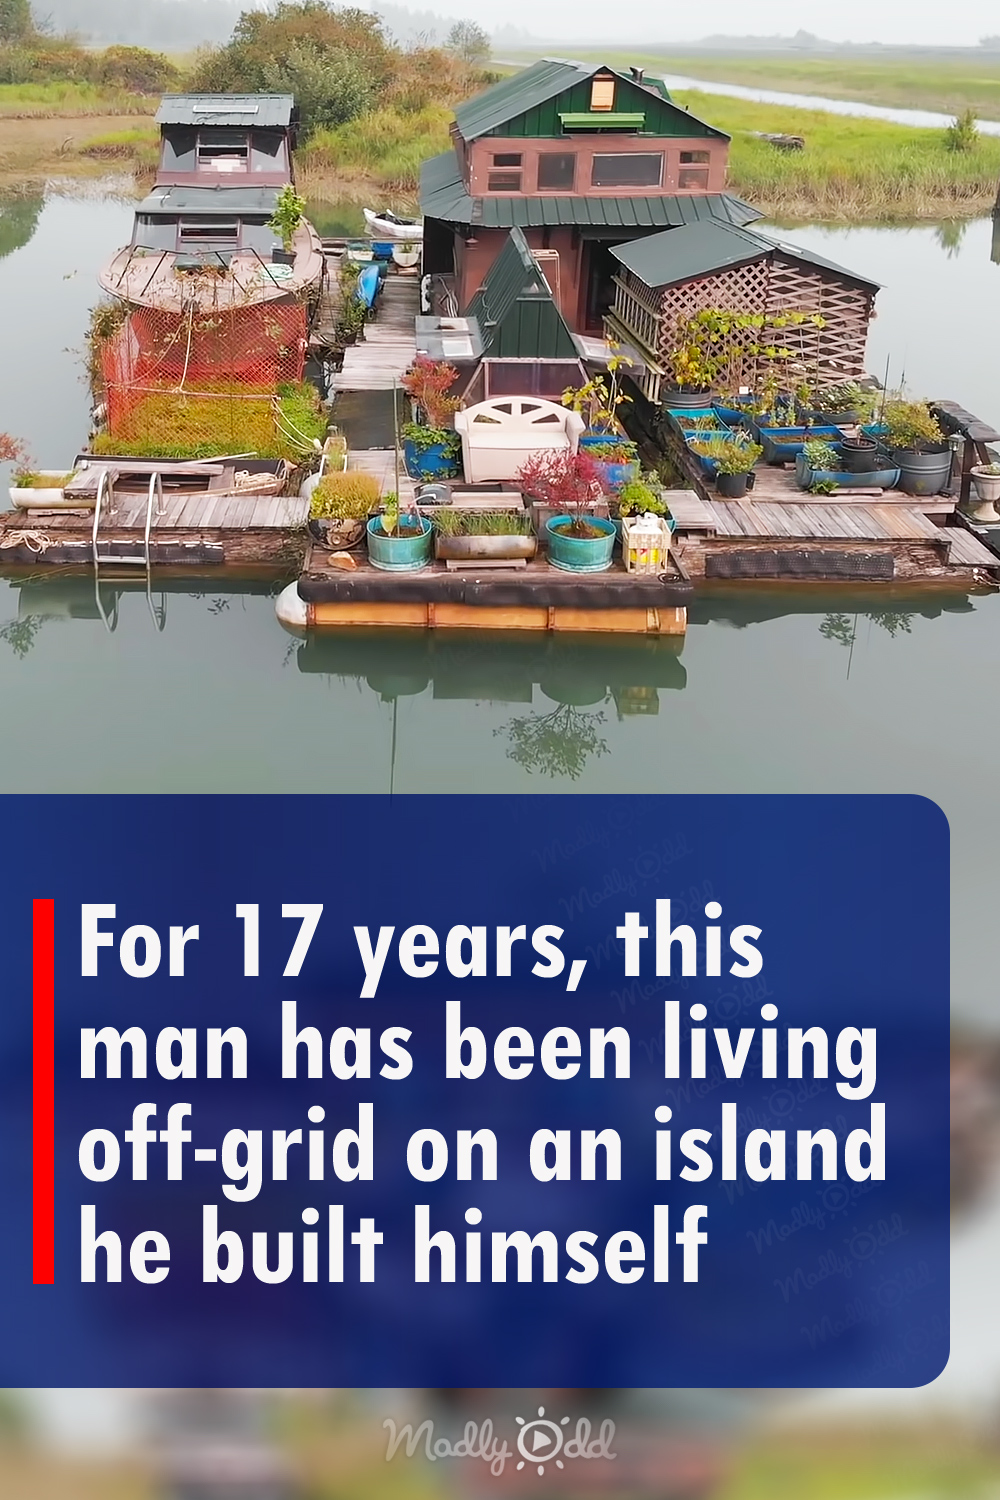 For 17 years, this man has been living off-grid on an island he built himself